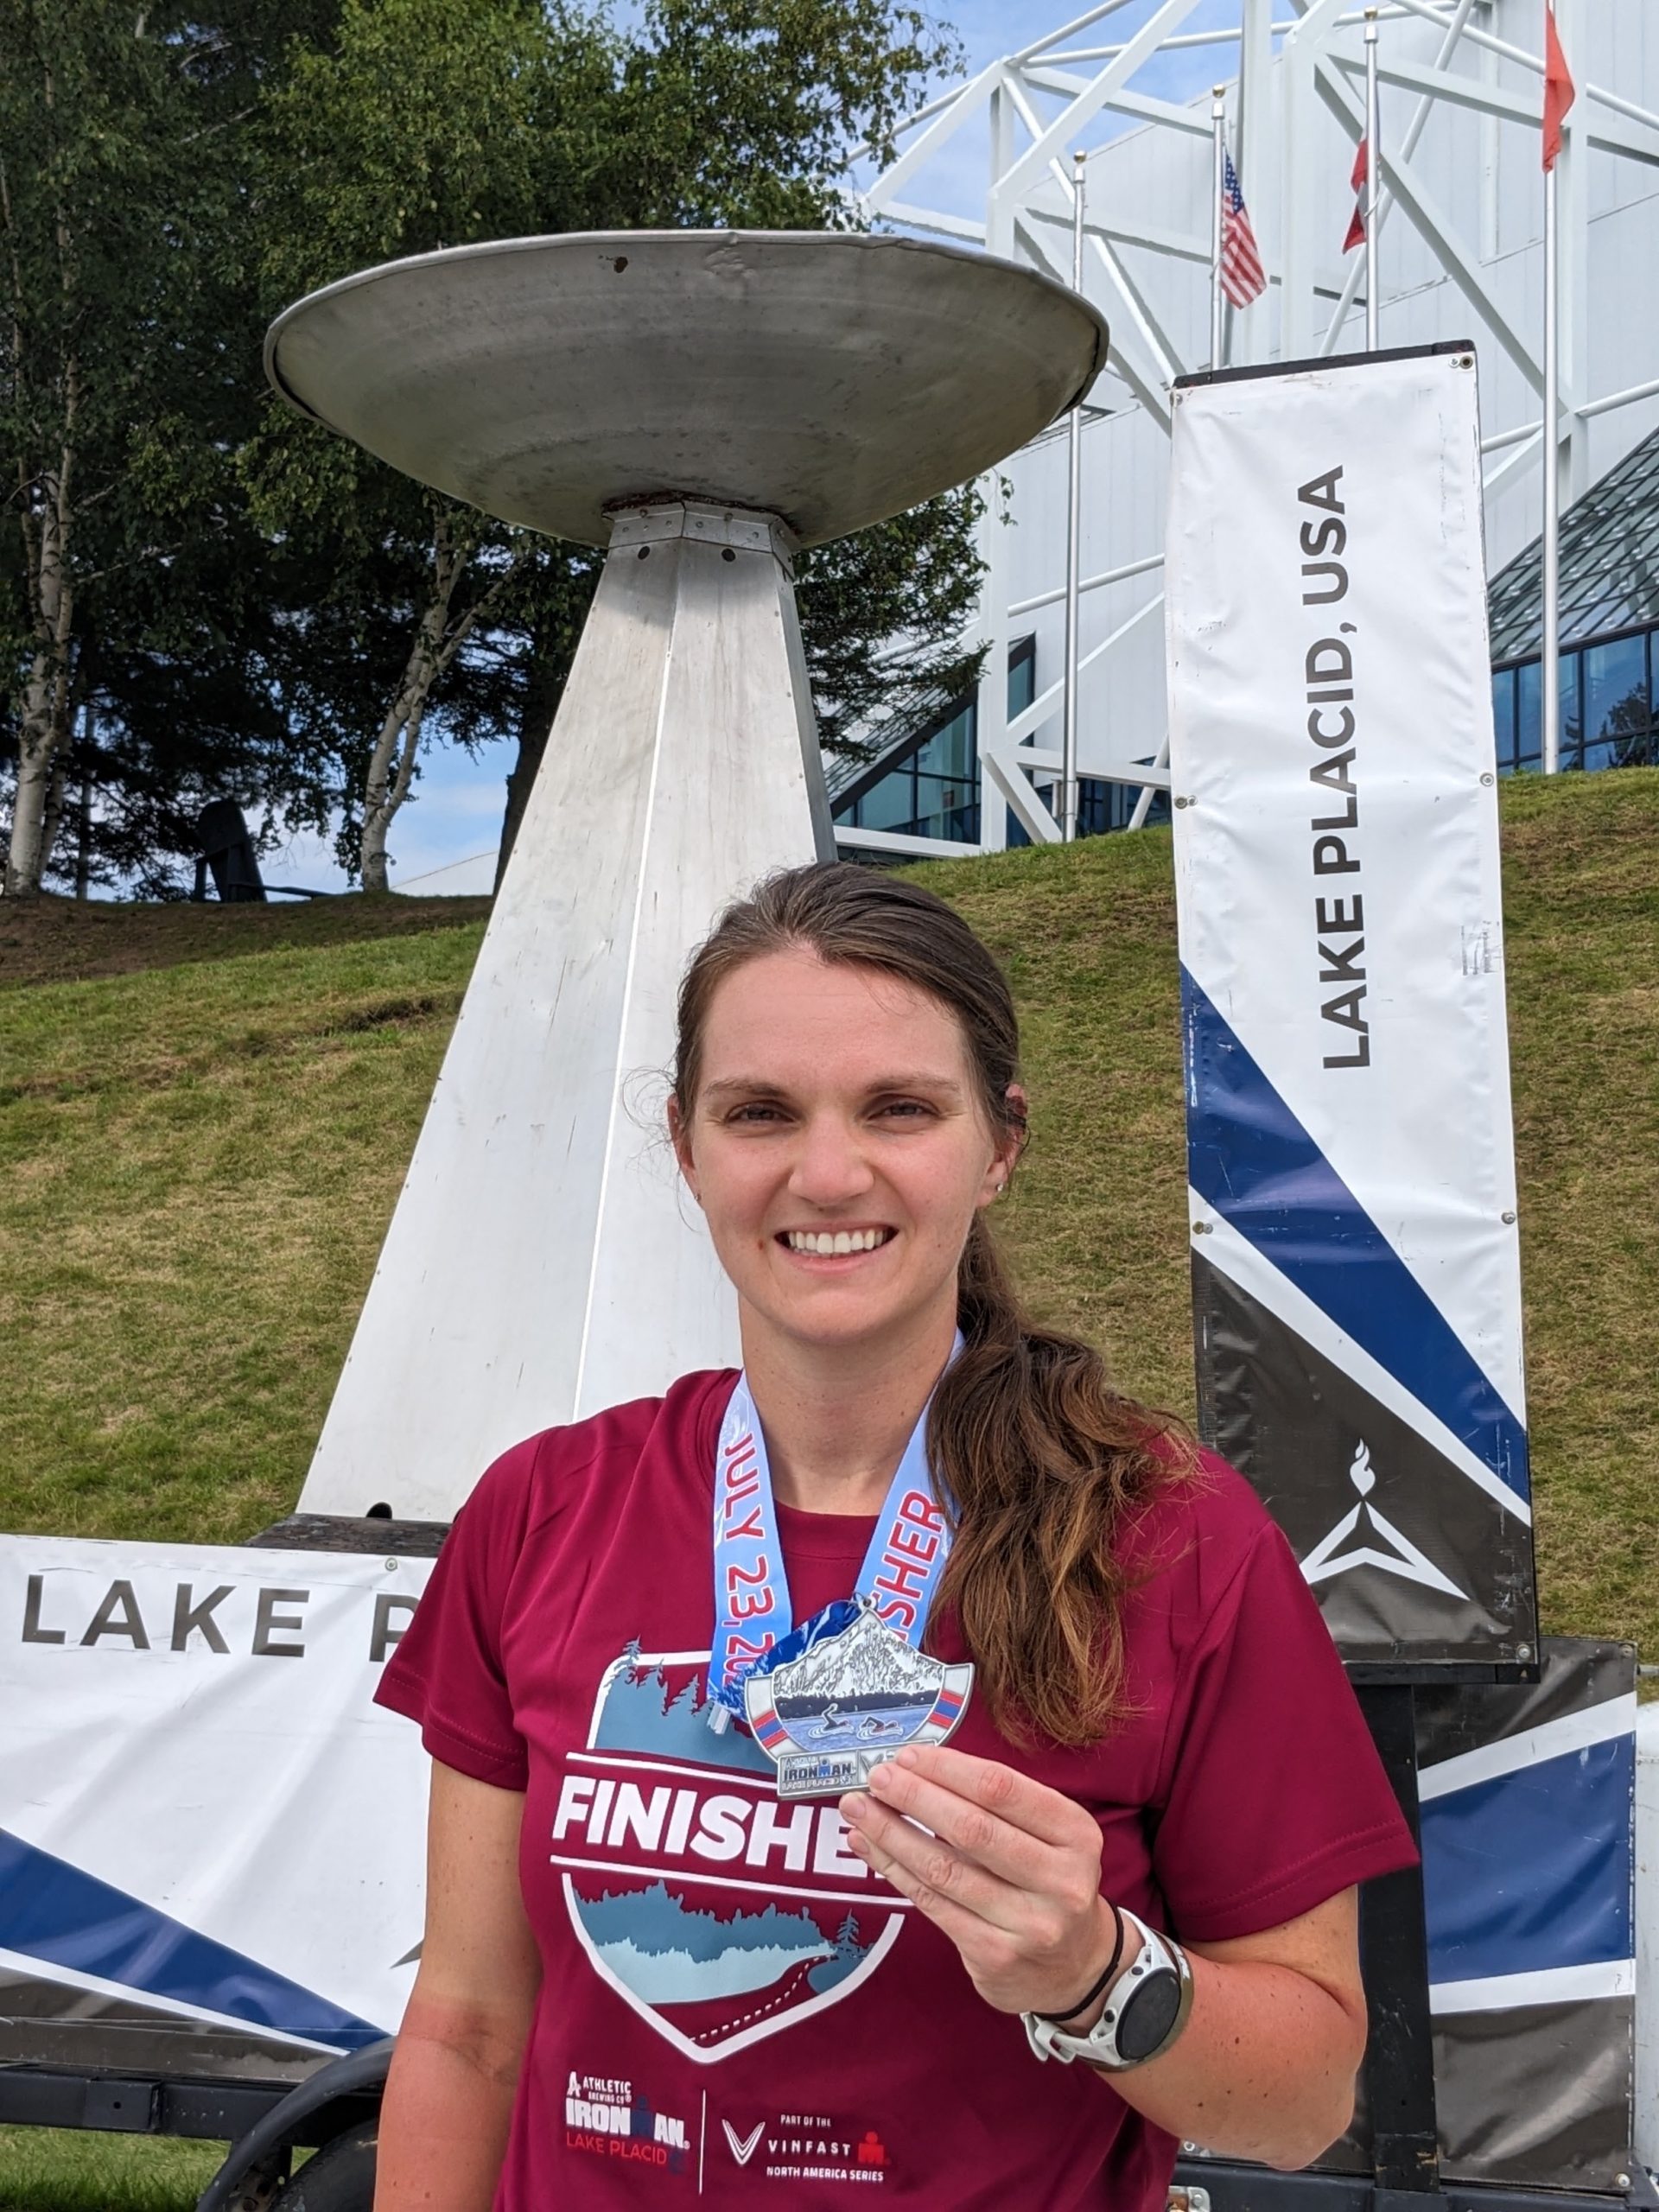 Jessica smashes her first full distance Ironman